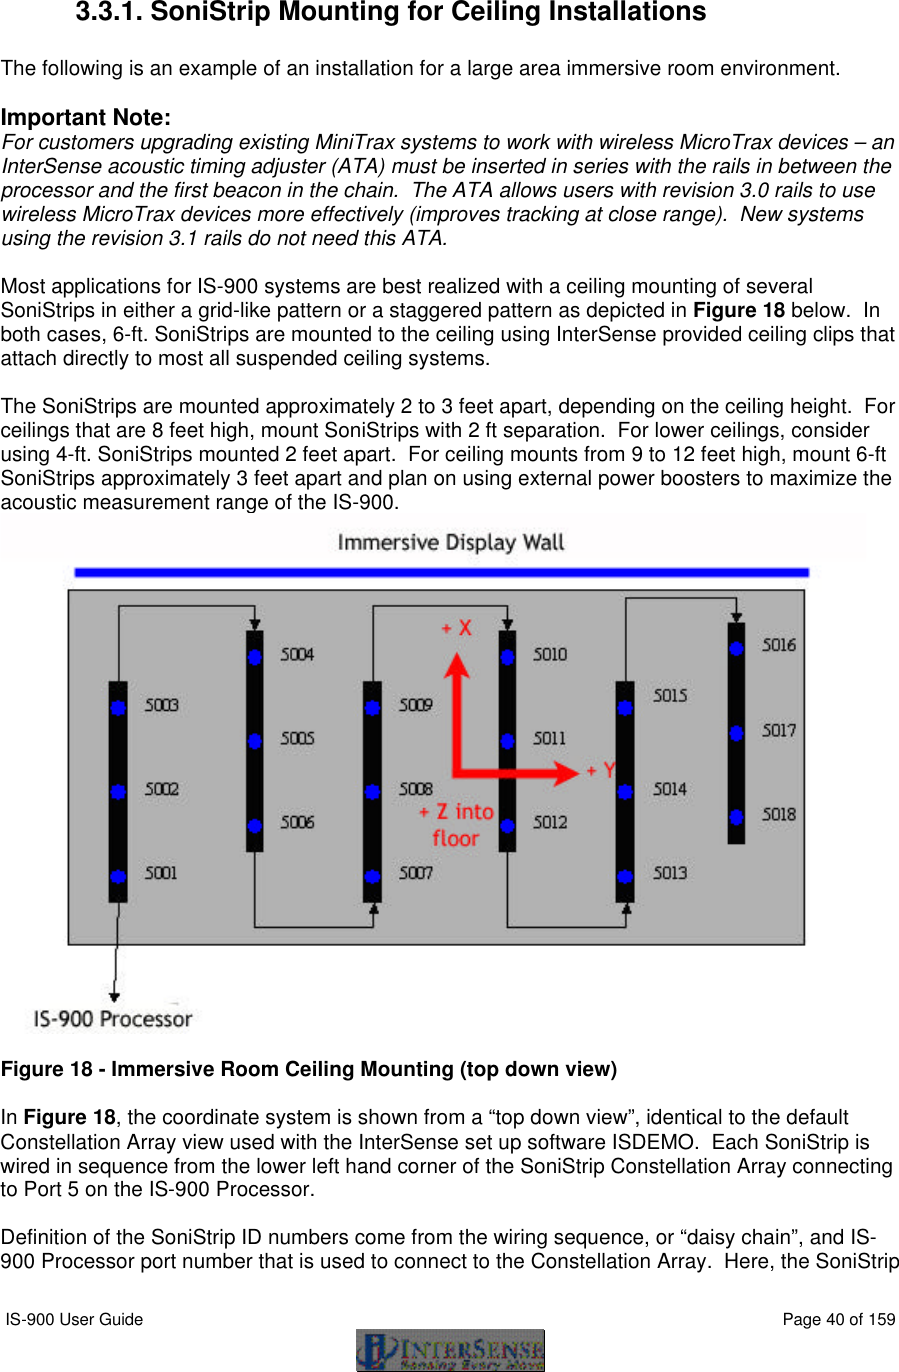  IS-900 User Guide                                                                                                                                          Page 40 of 159   3.3.1. SoniStrip Mounting for Ceiling Installations  The following is an example of an installation for a large area immersive room environment.  Important Note:   For customers upgrading existing MiniTrax systems to work with wireless MicroTrax devices – an InterSense acoustic timing adjuster (ATA) must be inserted in series with the rails in between the processor and the first beacon in the chain.  The ATA allows users with revision 3.0 rails to use wireless MicroTrax devices more effectively (improves tracking at close range).  New systems using the revision 3.1 rails do not need this ATA.  Most applications for IS-900 systems are best realized with a ceiling mounting of several SoniStrips in either a grid-like pattern or a staggered pattern as depicted in Figure 18 below.  In both cases, 6-ft. SoniStrips are mounted to the ceiling using InterSense provided ceiling clips that attach directly to most all suspended ceiling systems.  The SoniStrips are mounted approximately 2 to 3 feet apart, depending on the ceiling height.  For ceilings that are 8 feet high, mount SoniStrips with 2 ft separation.  For lower ceilings, consider using 4-ft. SoniStrips mounted 2 feet apart.  For ceiling mounts from 9 to 12 feet high, mount 6-ft SoniStrips approximately 3 feet apart and plan on using external power boosters to maximize the acoustic measurement range of the IS-900.   Figure 18 - Immersive Room Ceiling Mounting (top down view)  In Figure 18, the coordinate system is shown from a “top down view”, identical to the default Constellation Array view used with the InterSense set up software ISDEMO.  Each SoniStrip is wired in sequence from the lower left hand corner of the SoniStrip Constellation Array connecting to Port 5 on the IS-900 Processor.  Definition of the SoniStrip ID numbers come from the wiring sequence, or “daisy chain”, and IS-900 Processor port number that is used to connect to the Constellation Array.  Here, the SoniStrip 